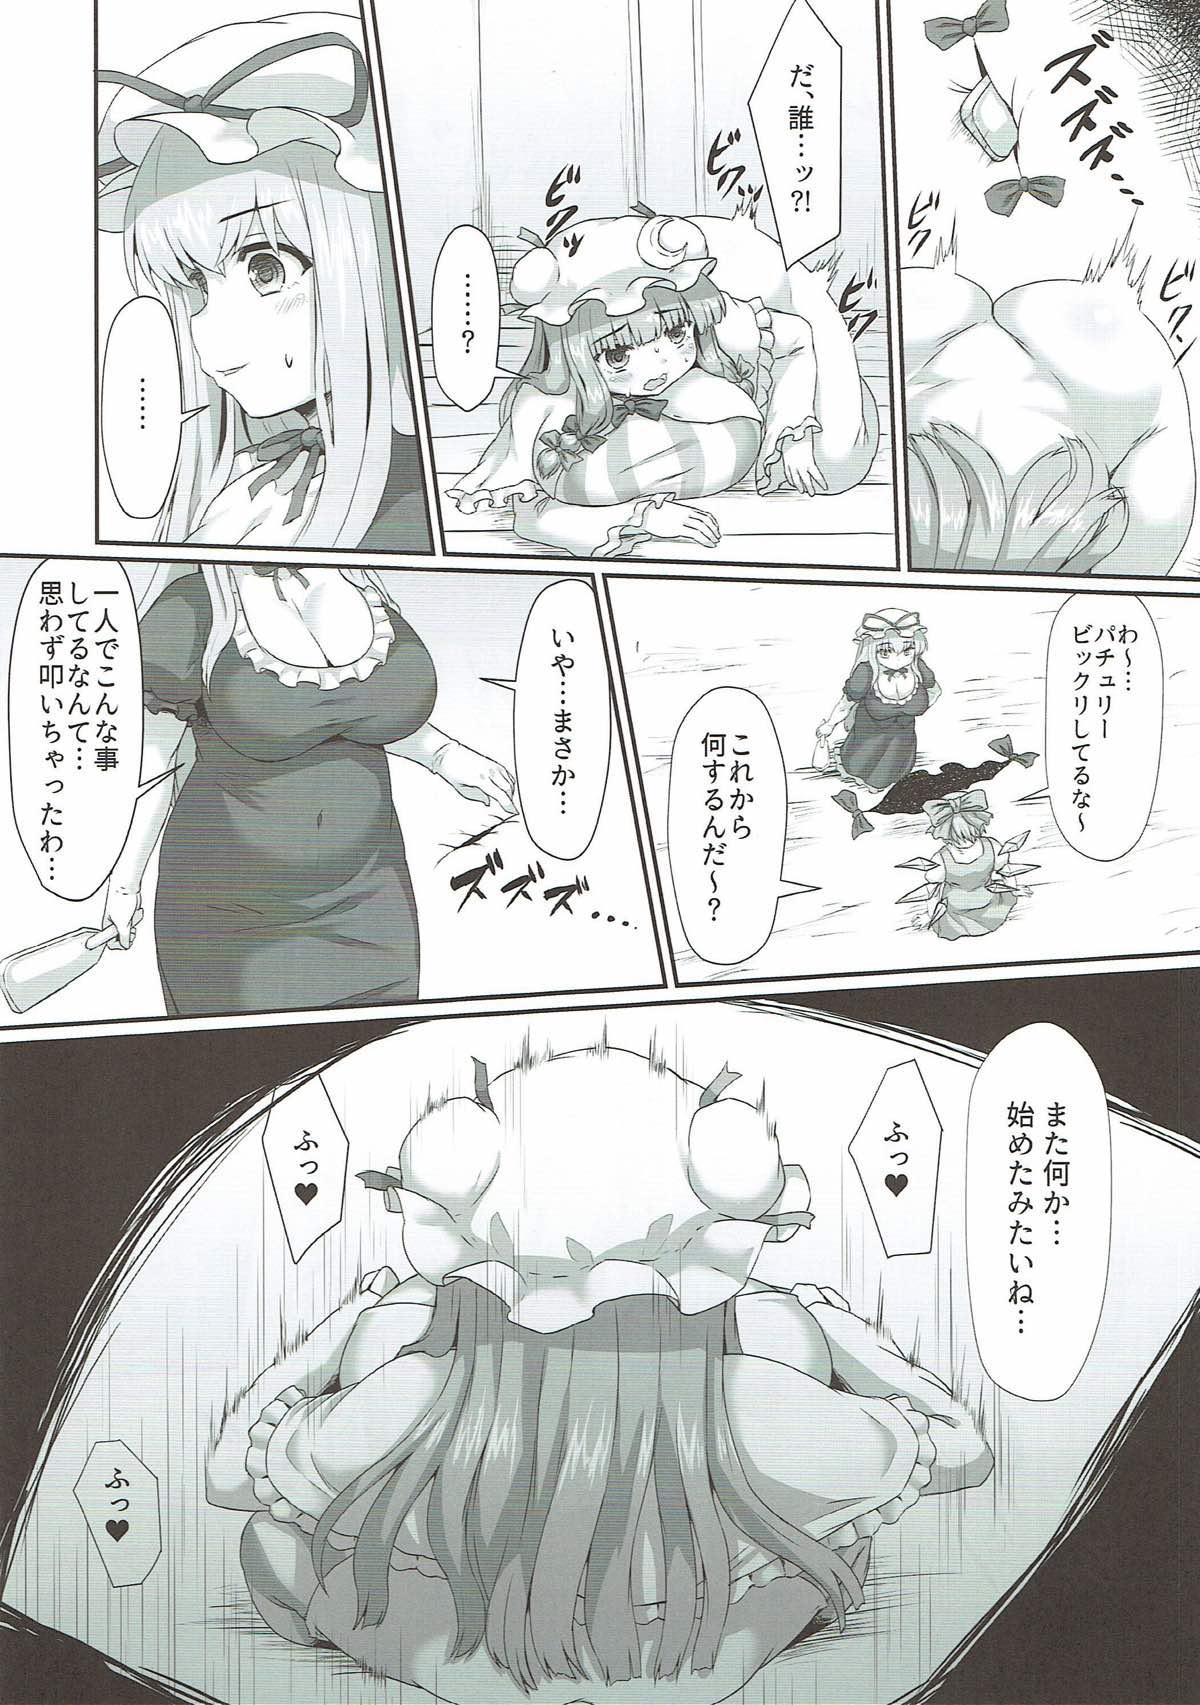 Oiled パチュリーの尻穴本 - Touhou project Gay Cash - Page 5